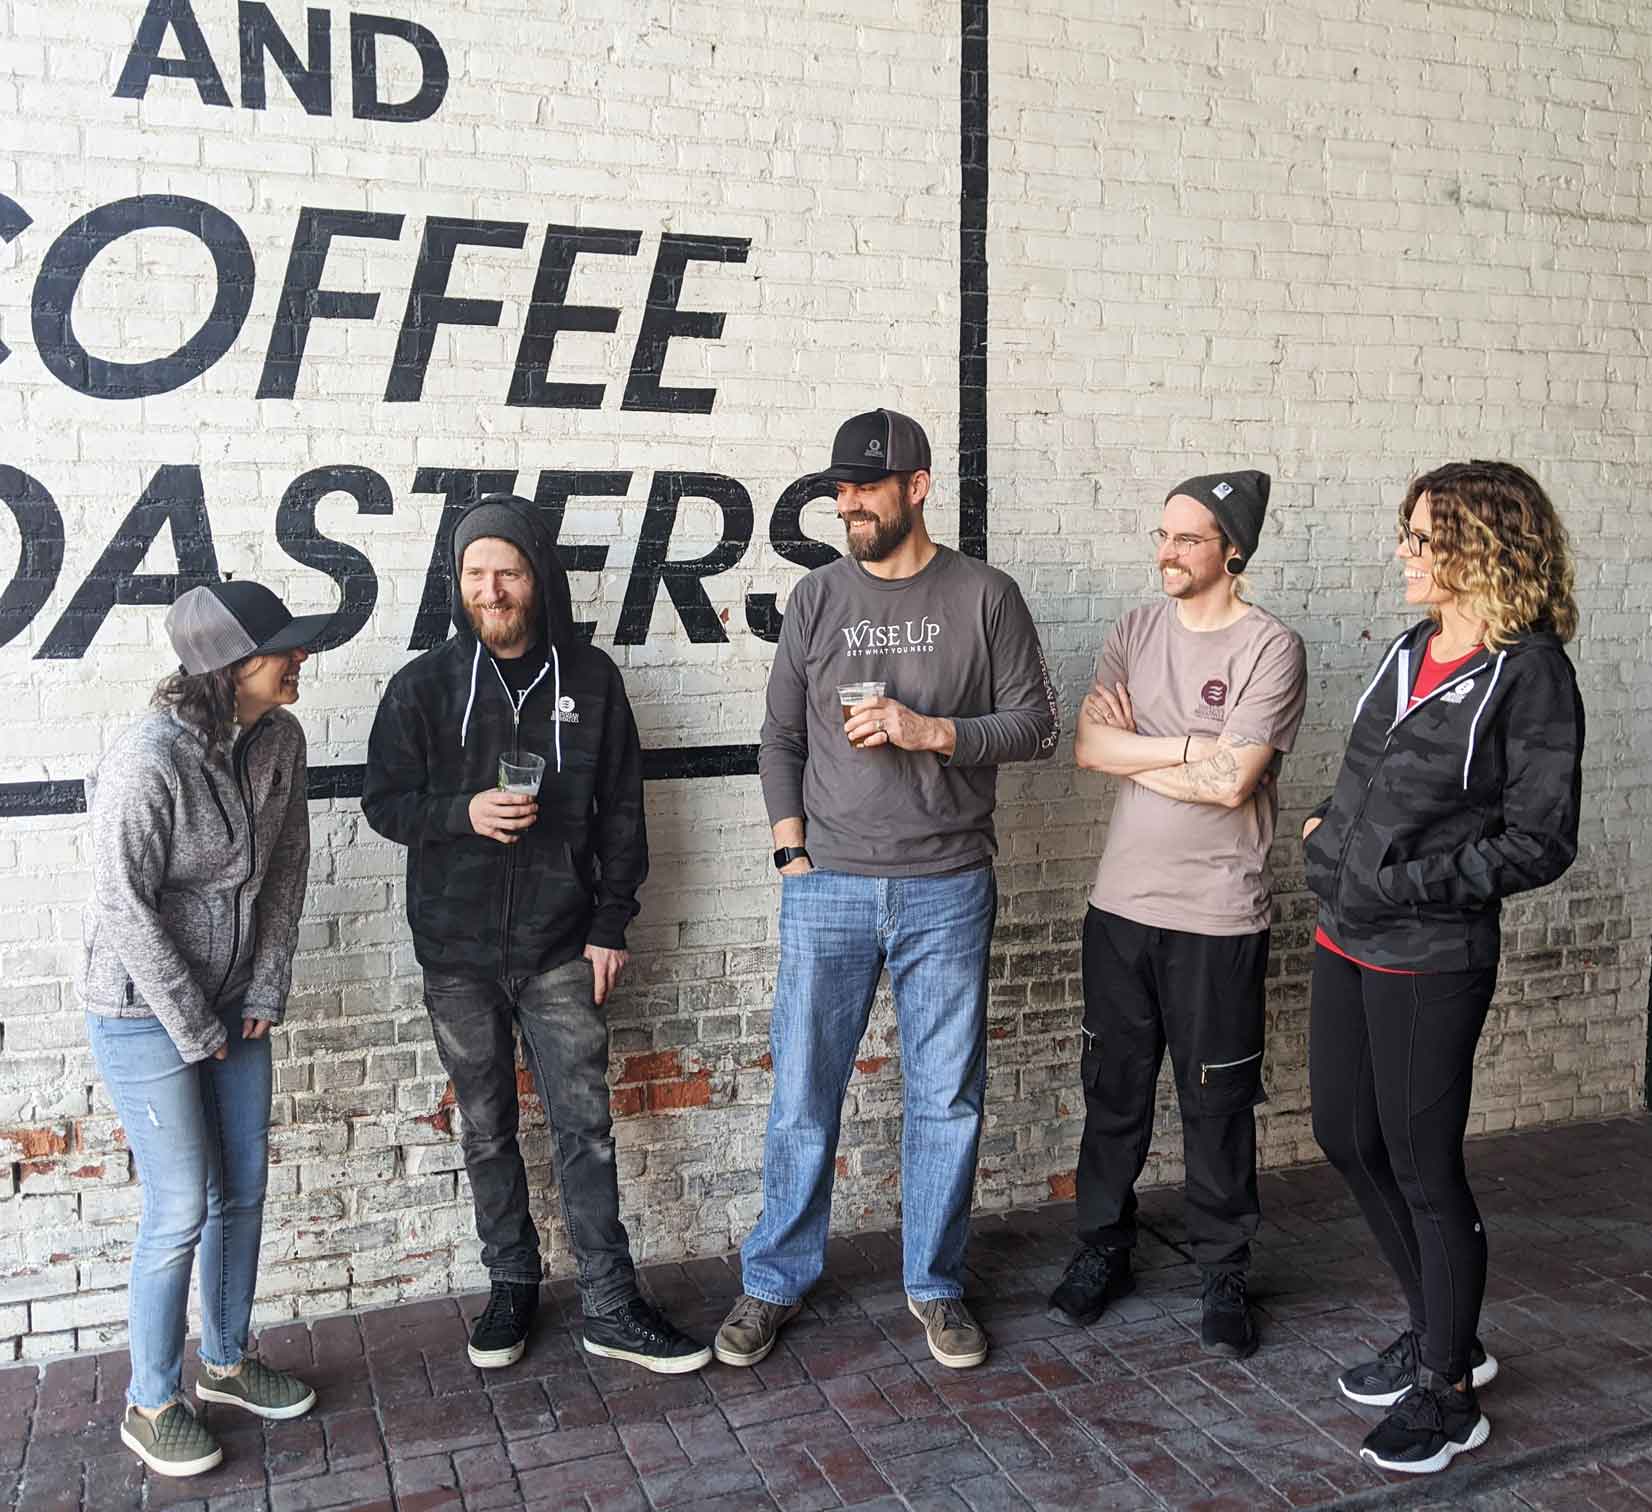 Empyrean Brewing Co. employees standing in front of the Coffee and Spice Building